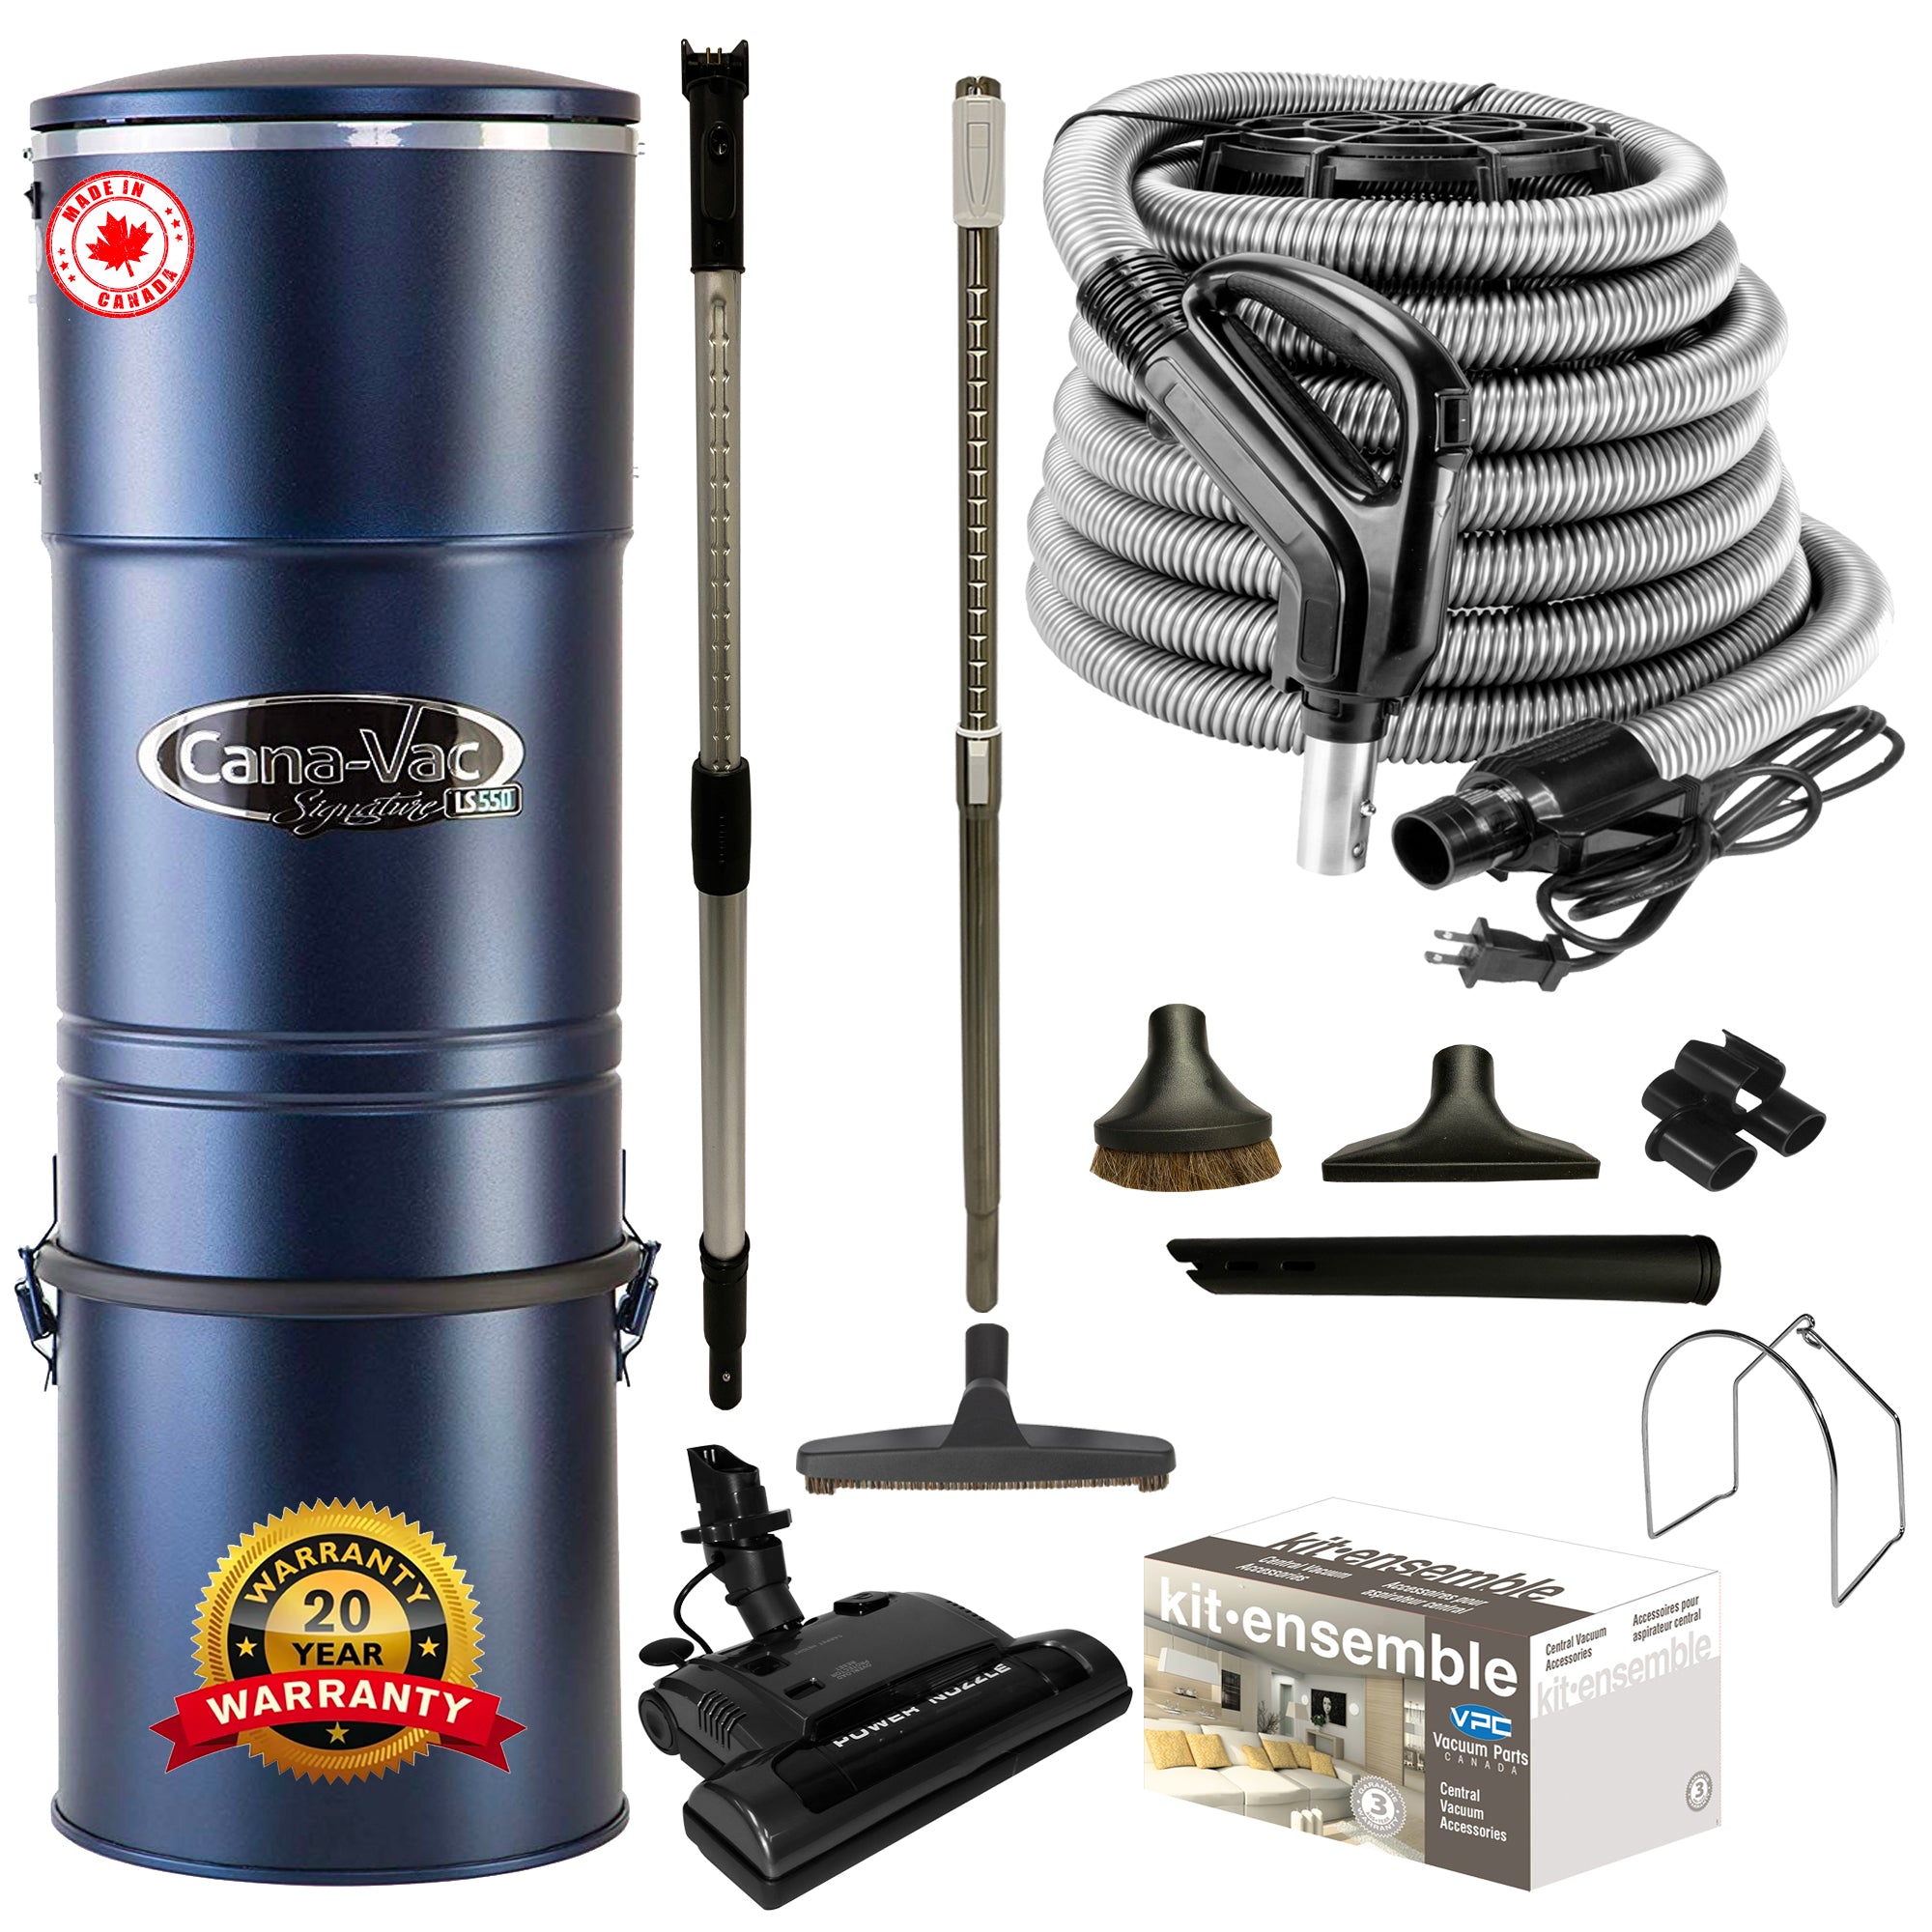 Cana-Vac LS590 Central Vacuum with Standard Electric Package (Black)